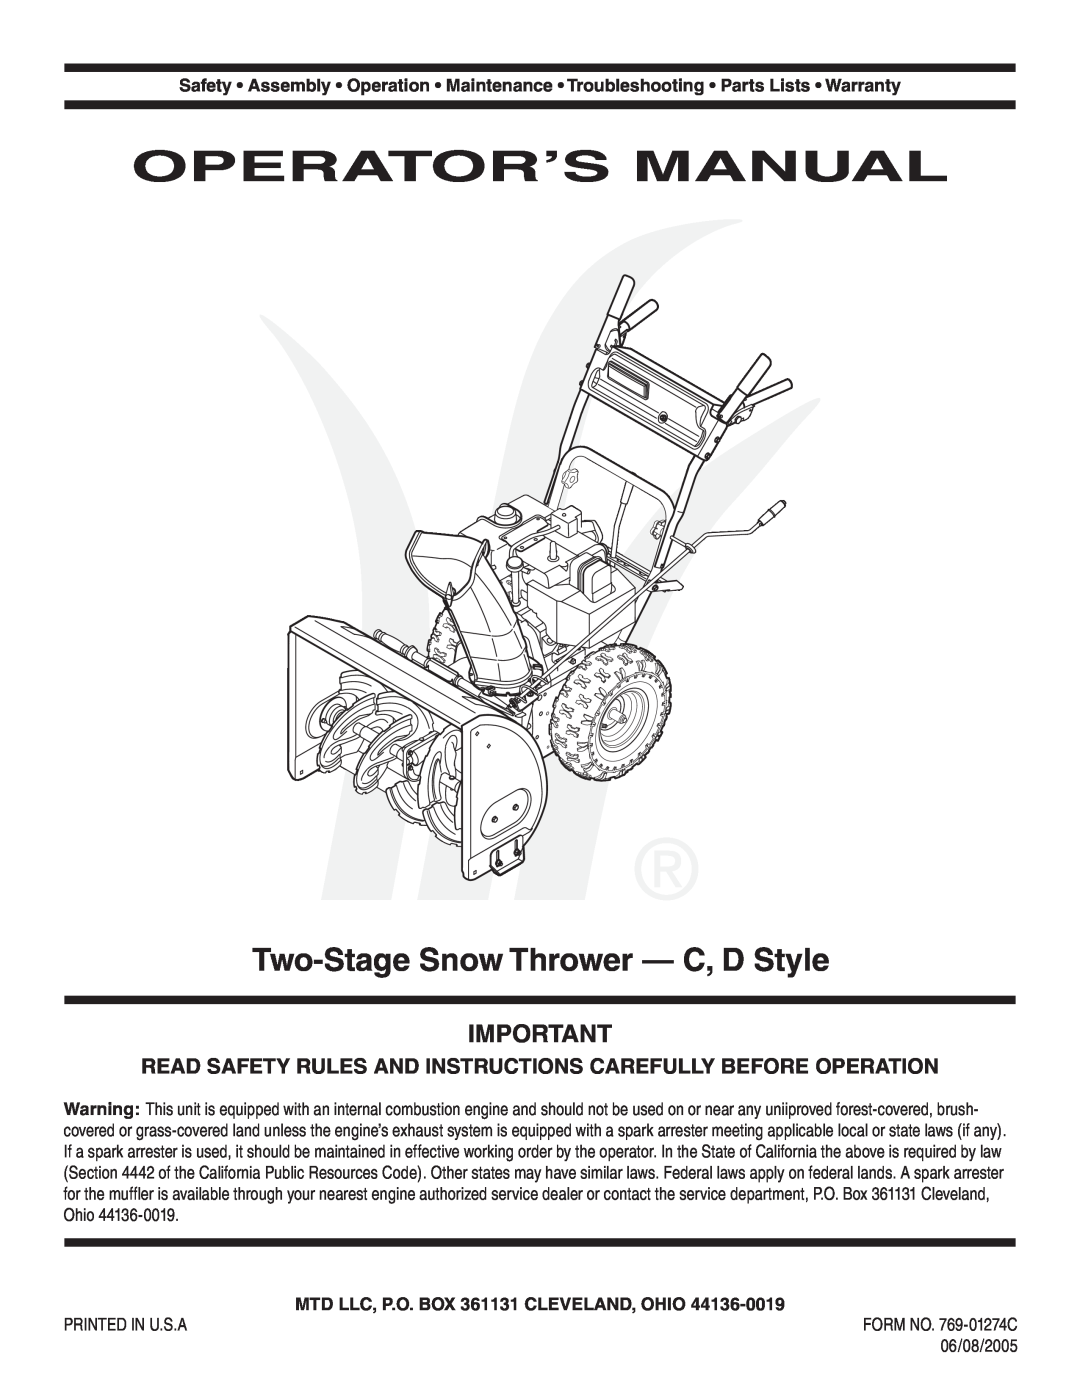 MTD C Style warranty Operator’S Manual, Two-Stage Snow Thrower - C, D Style, MTD LLC, P.O. BOX 361131 CLEVELAND, OHIO 